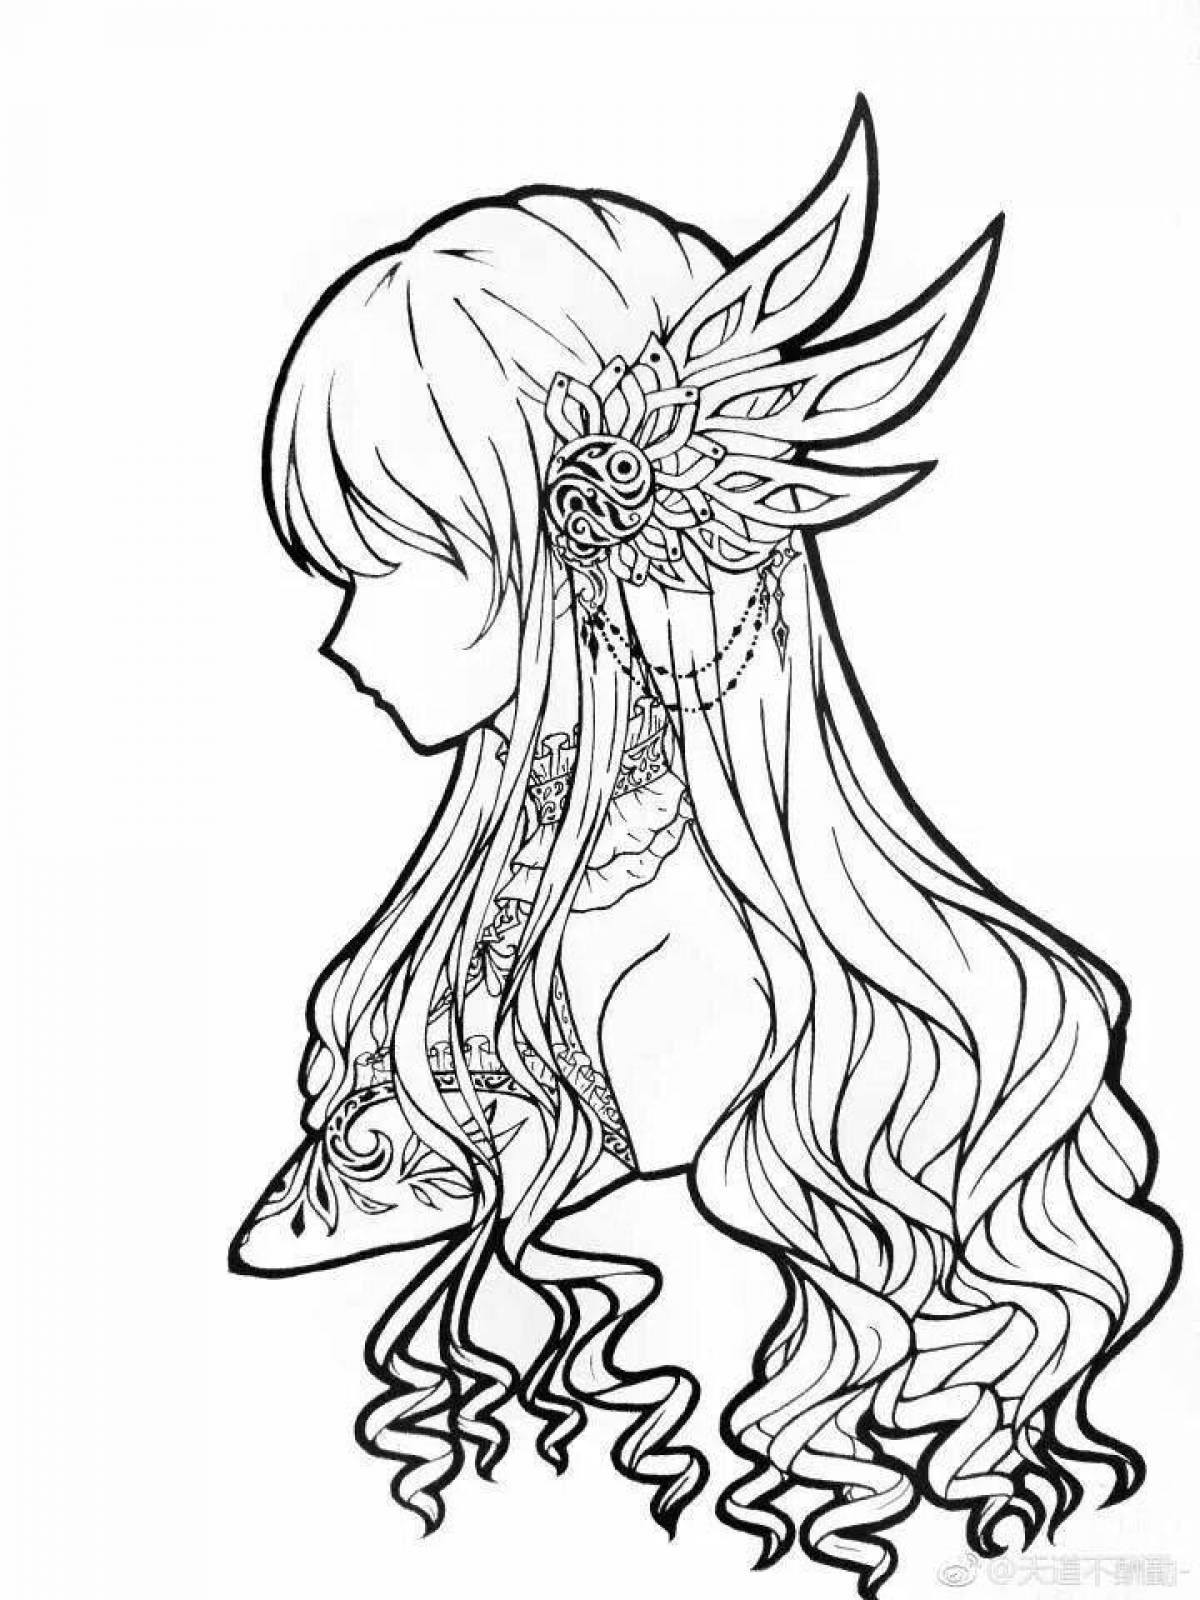 Coloring book of a girl with long hair